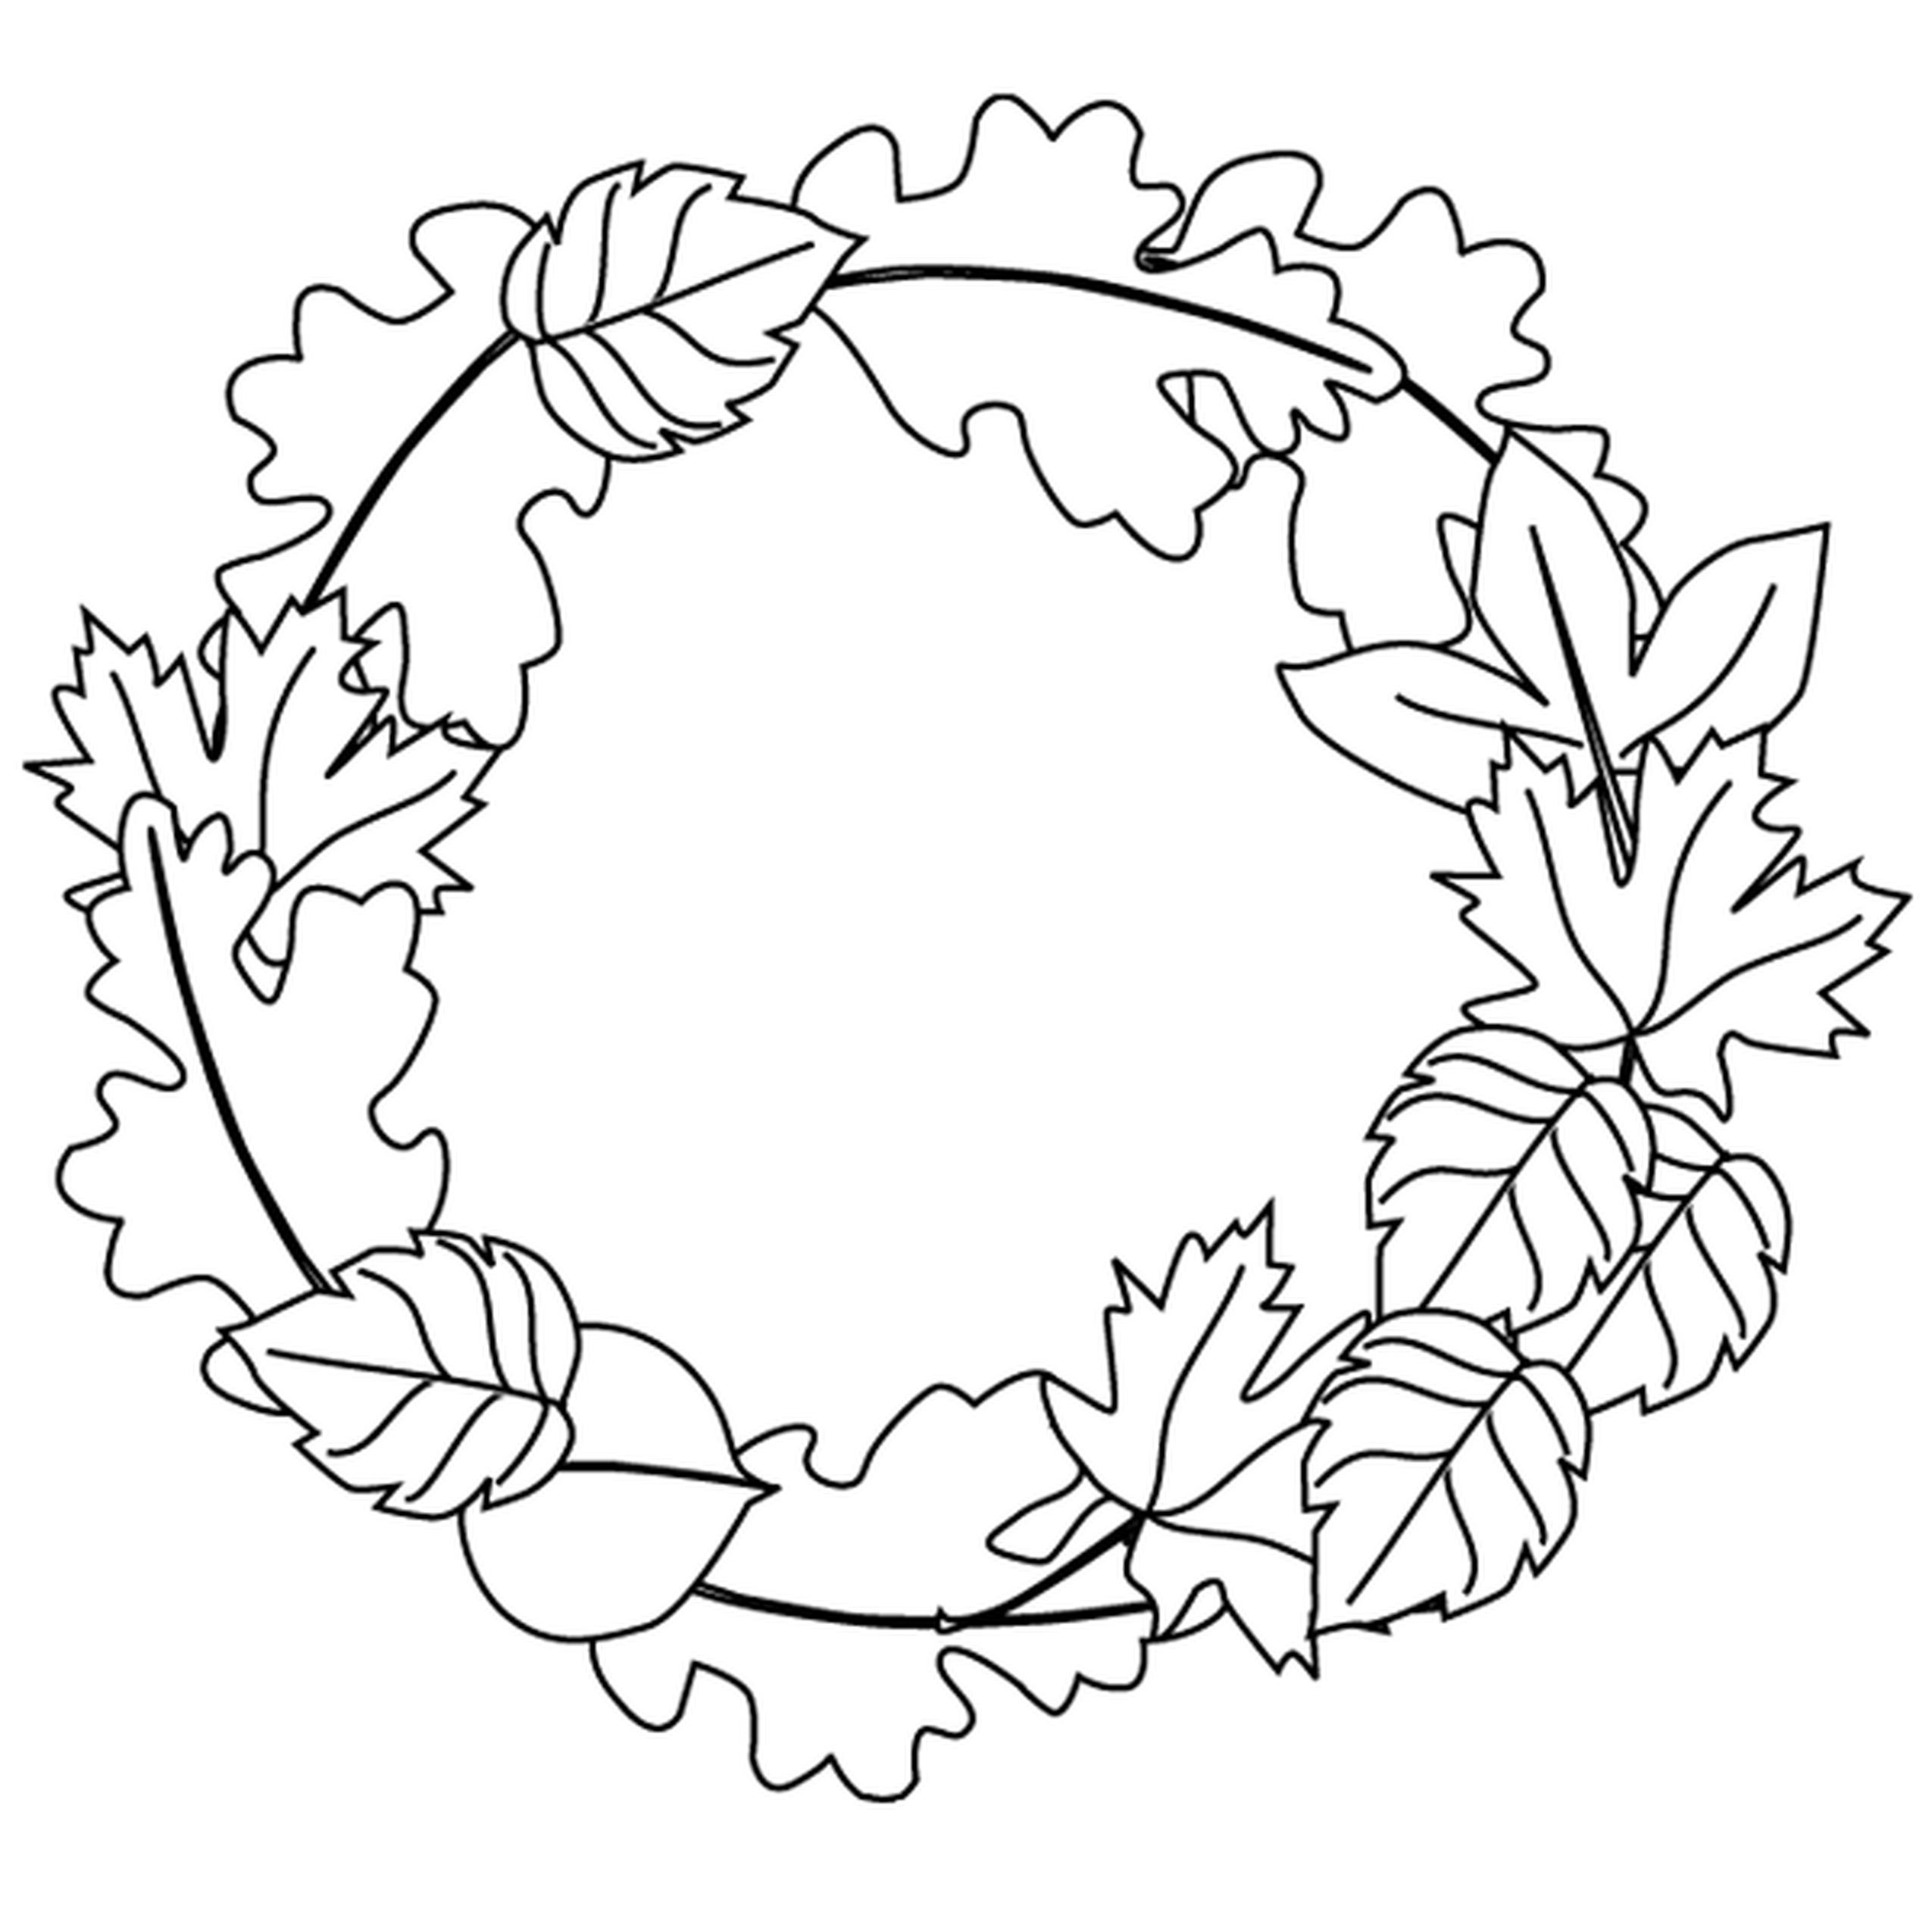 Autumn Leaves Coloring Pages
 Autumn Leaves Coloring Pages Bestofcoloring